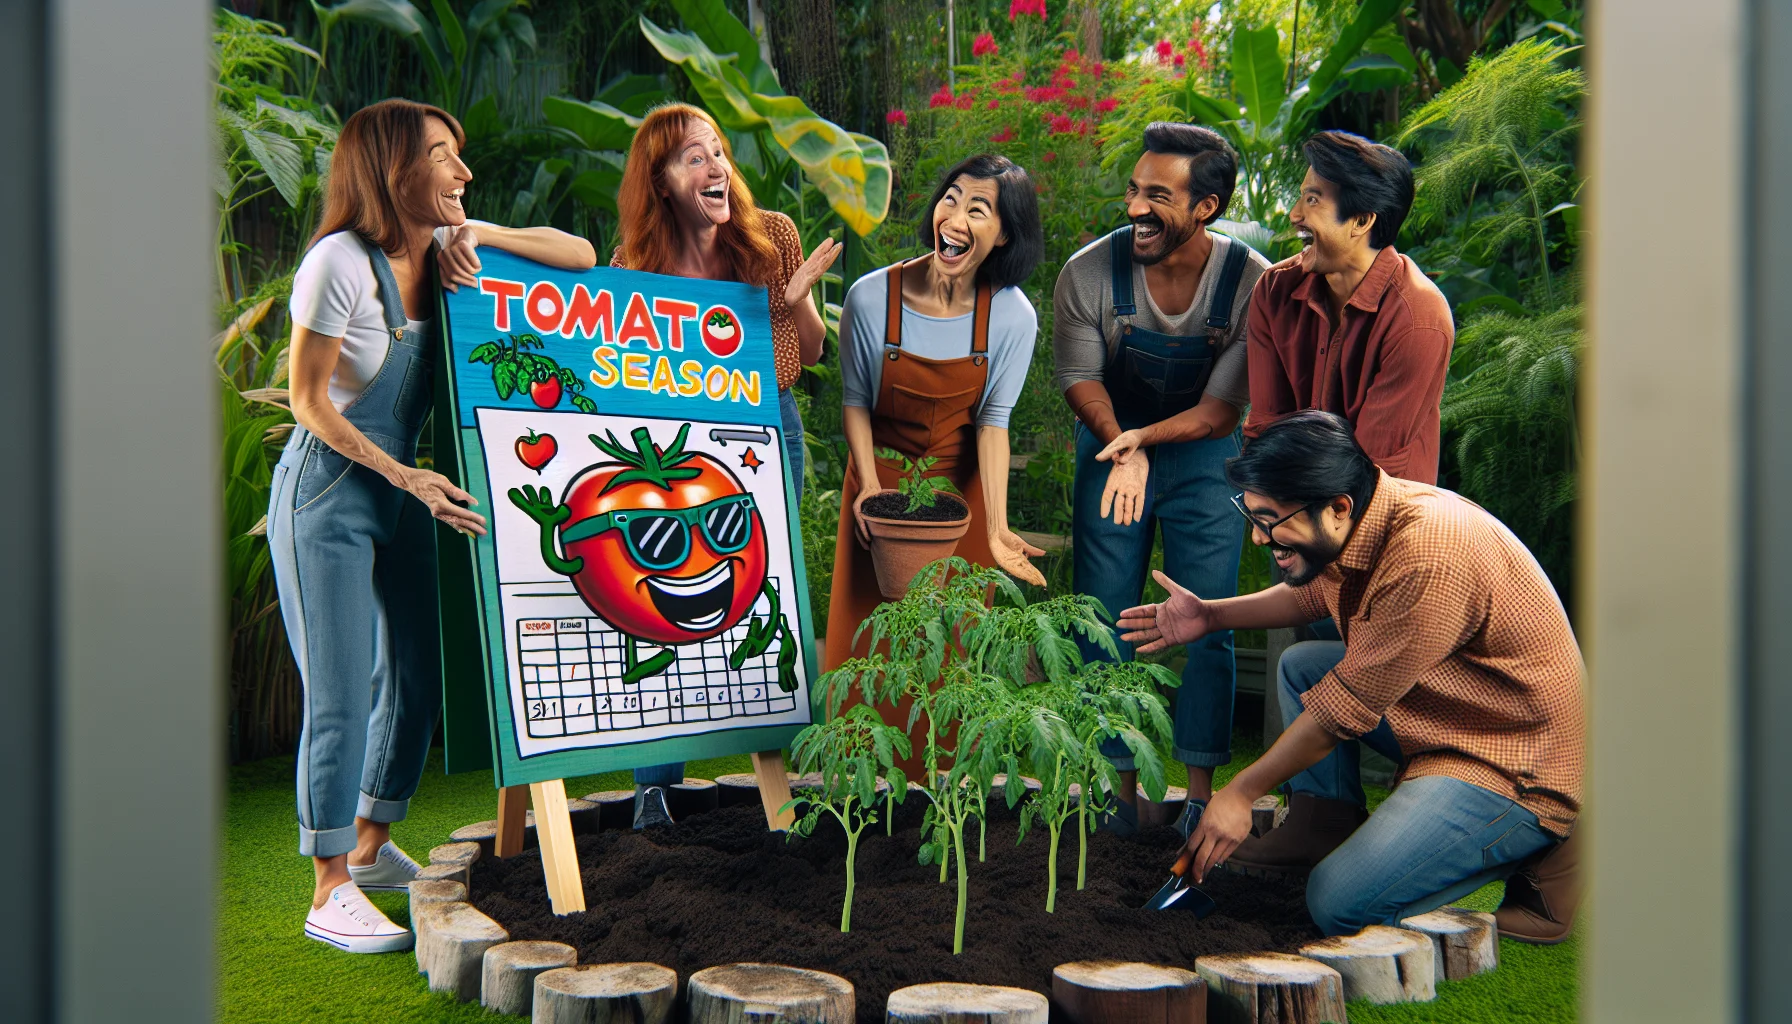 Create a humorous and realistic setting in a lush, green garden where a group of multinational individuals are planting tomato seedlings. One Caucasian woman seems to be teaching her companions: a Middle-Eastern man, a Hispanic woman, and a South Asian man, having a laugh about something. A large, colorful signboard stands nearby, comically depicting a tomato with sunglasses and a sly grin, holding a calendar marked 'Tomato Planting Season'. The joy and hilarity of the scene inspire a love for gardening.